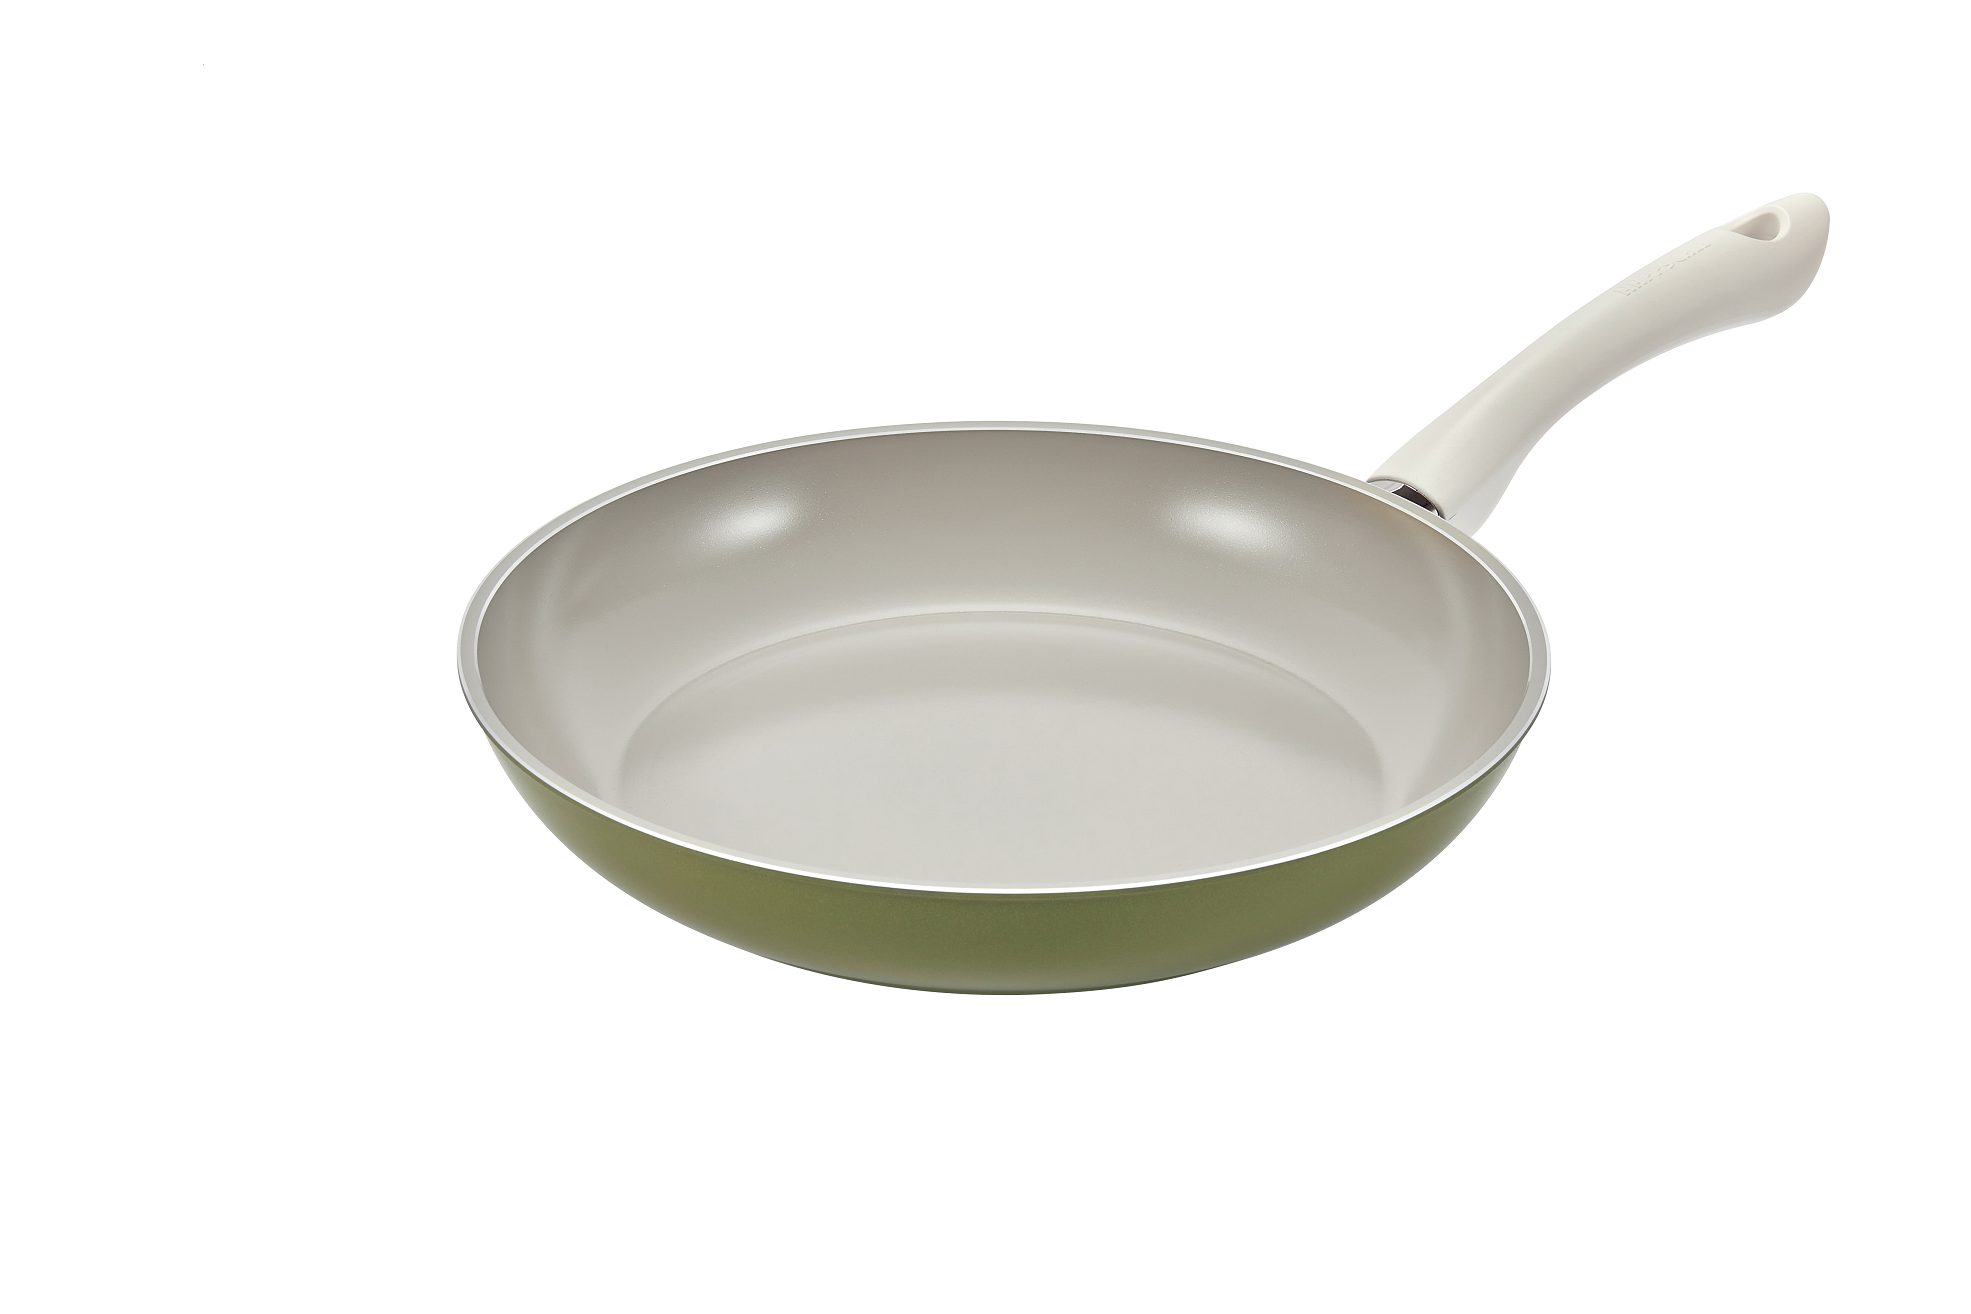 Happycall Agave IH Ceramic Coating Frypan - 28cm with Lid